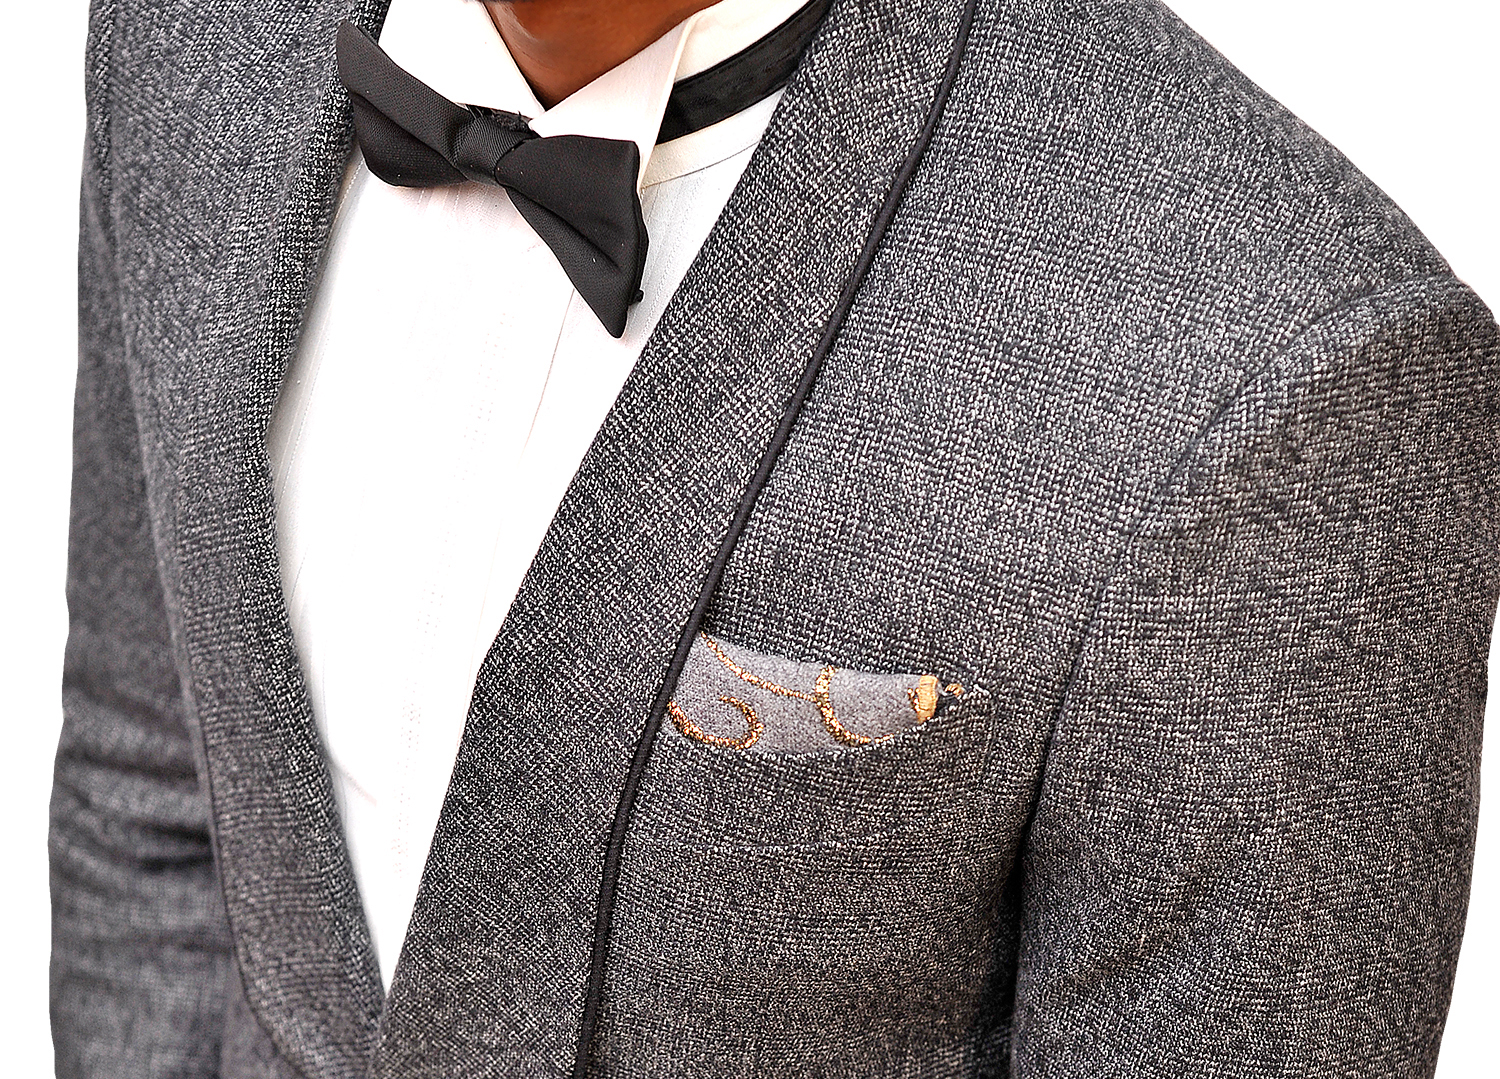 Complementary Italian fabric pocket square